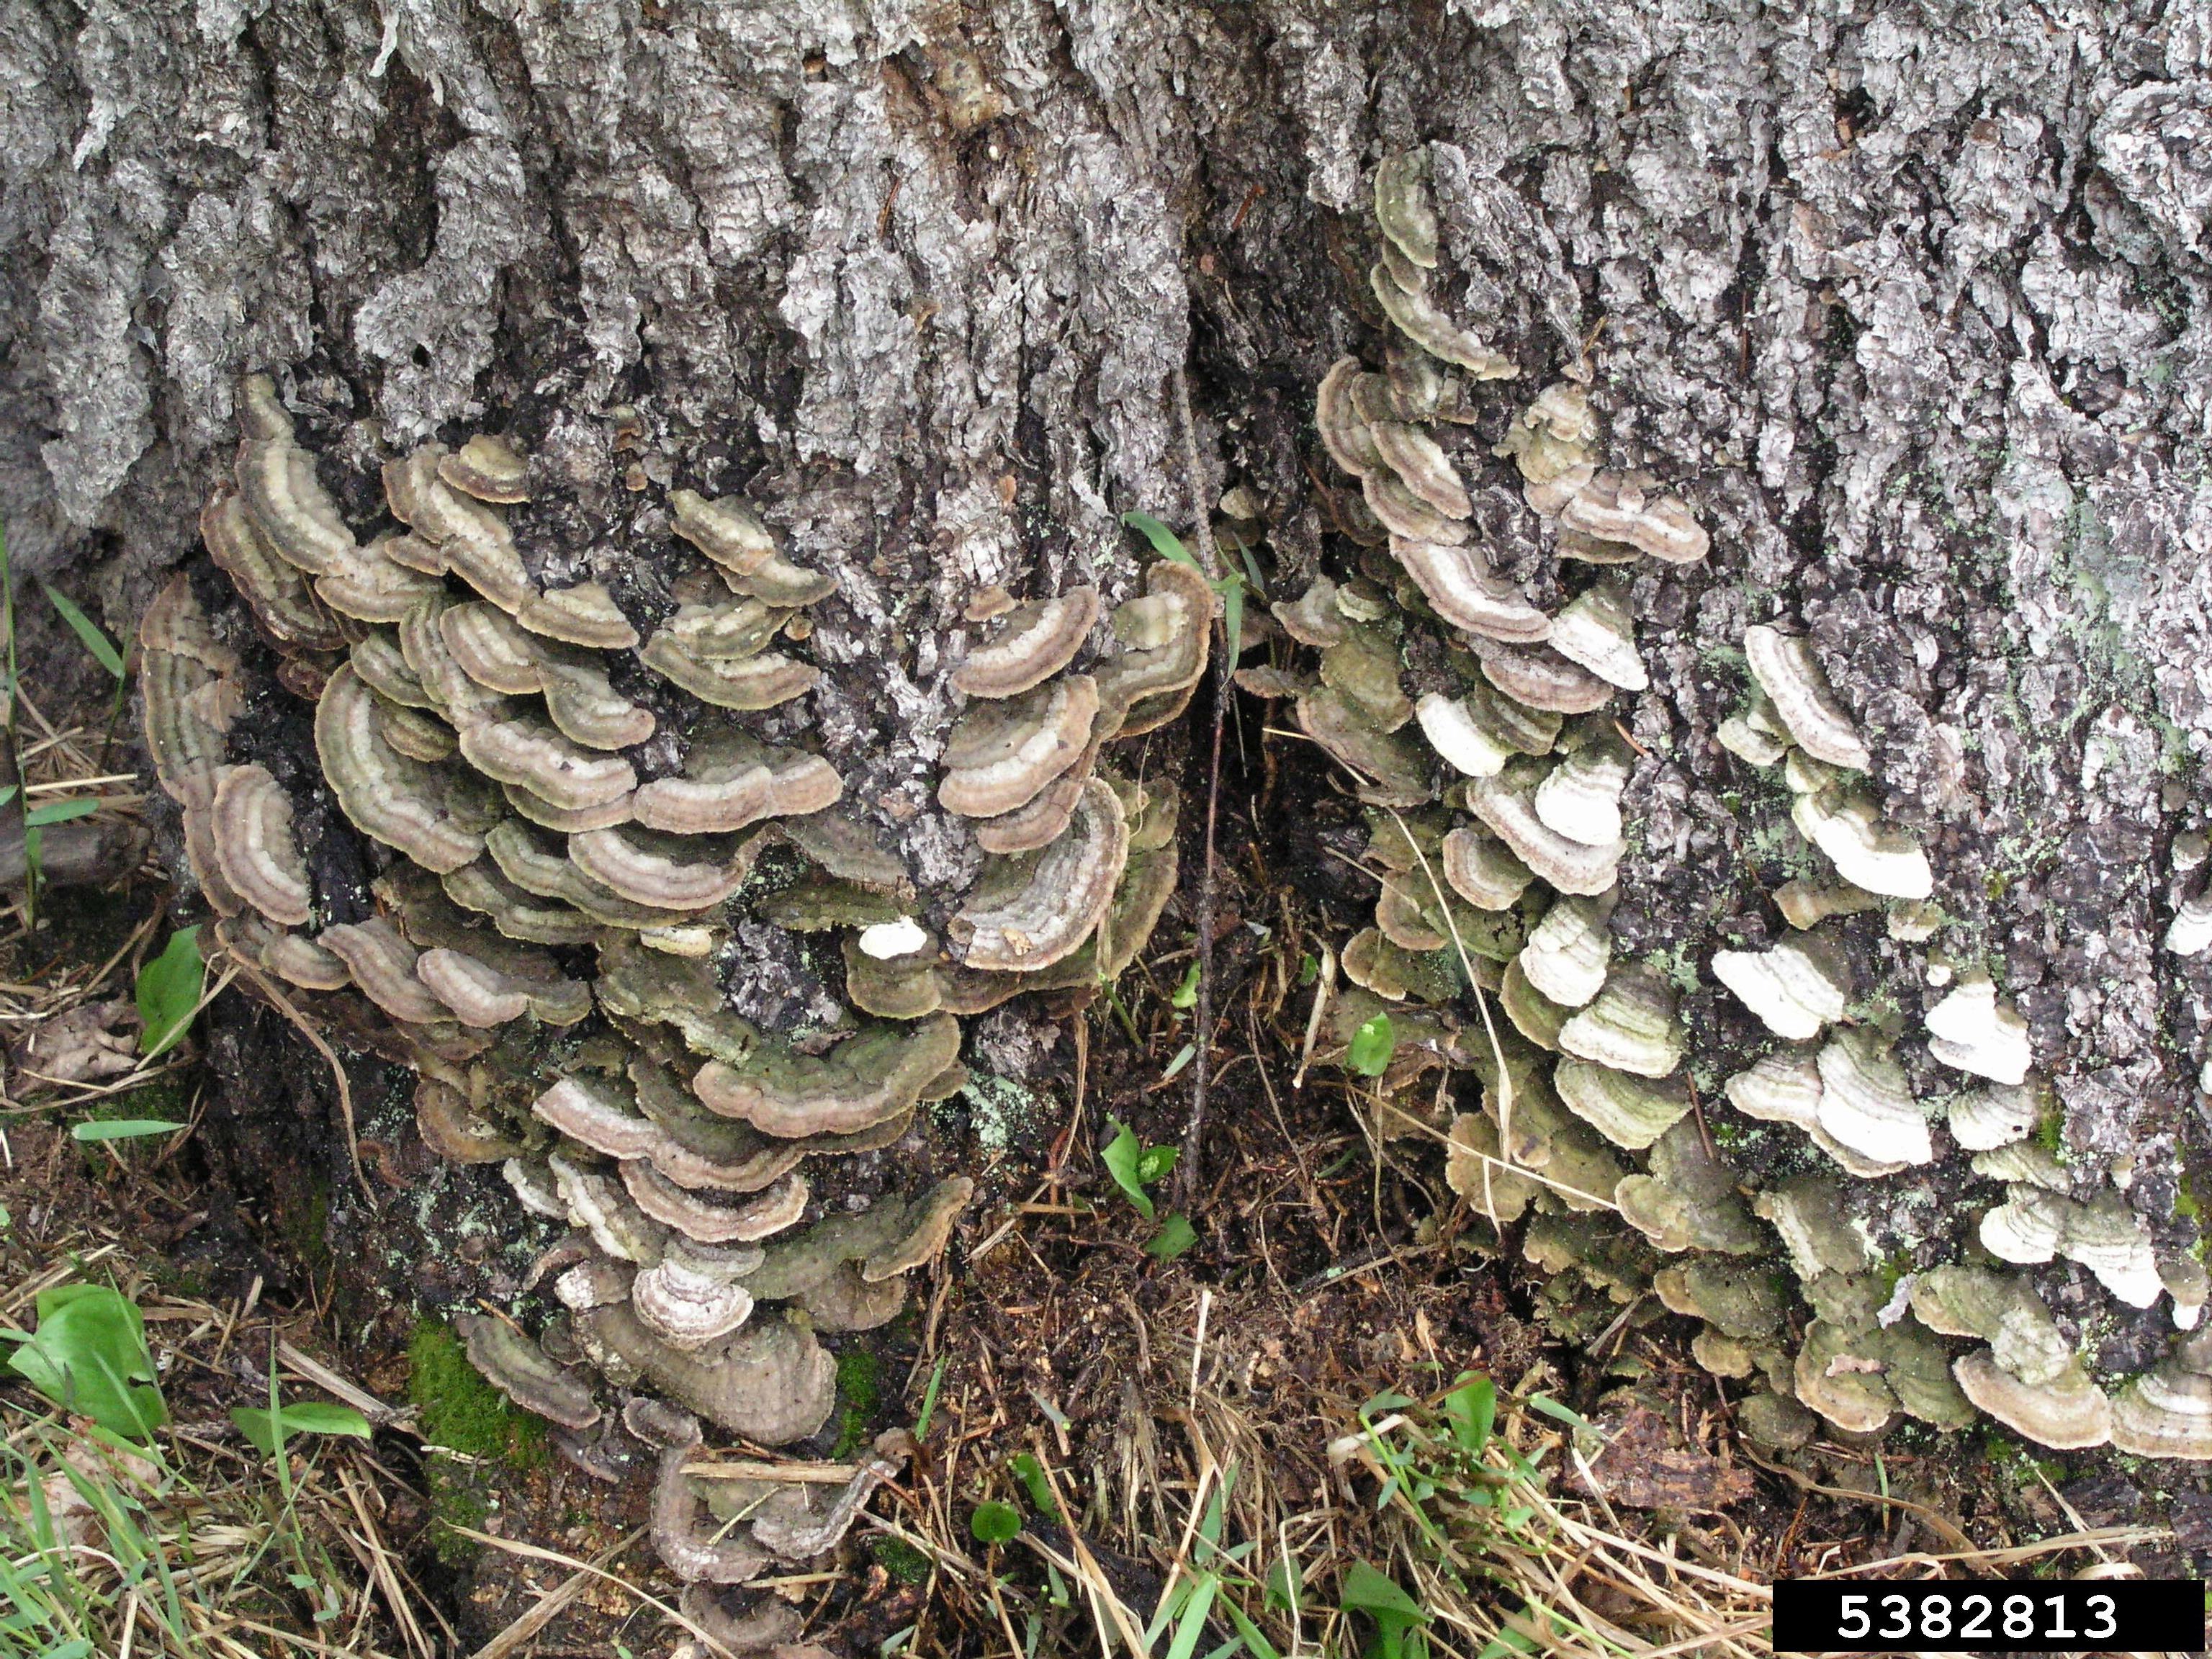 The base of a tree with bracket fungus growing from the bark.